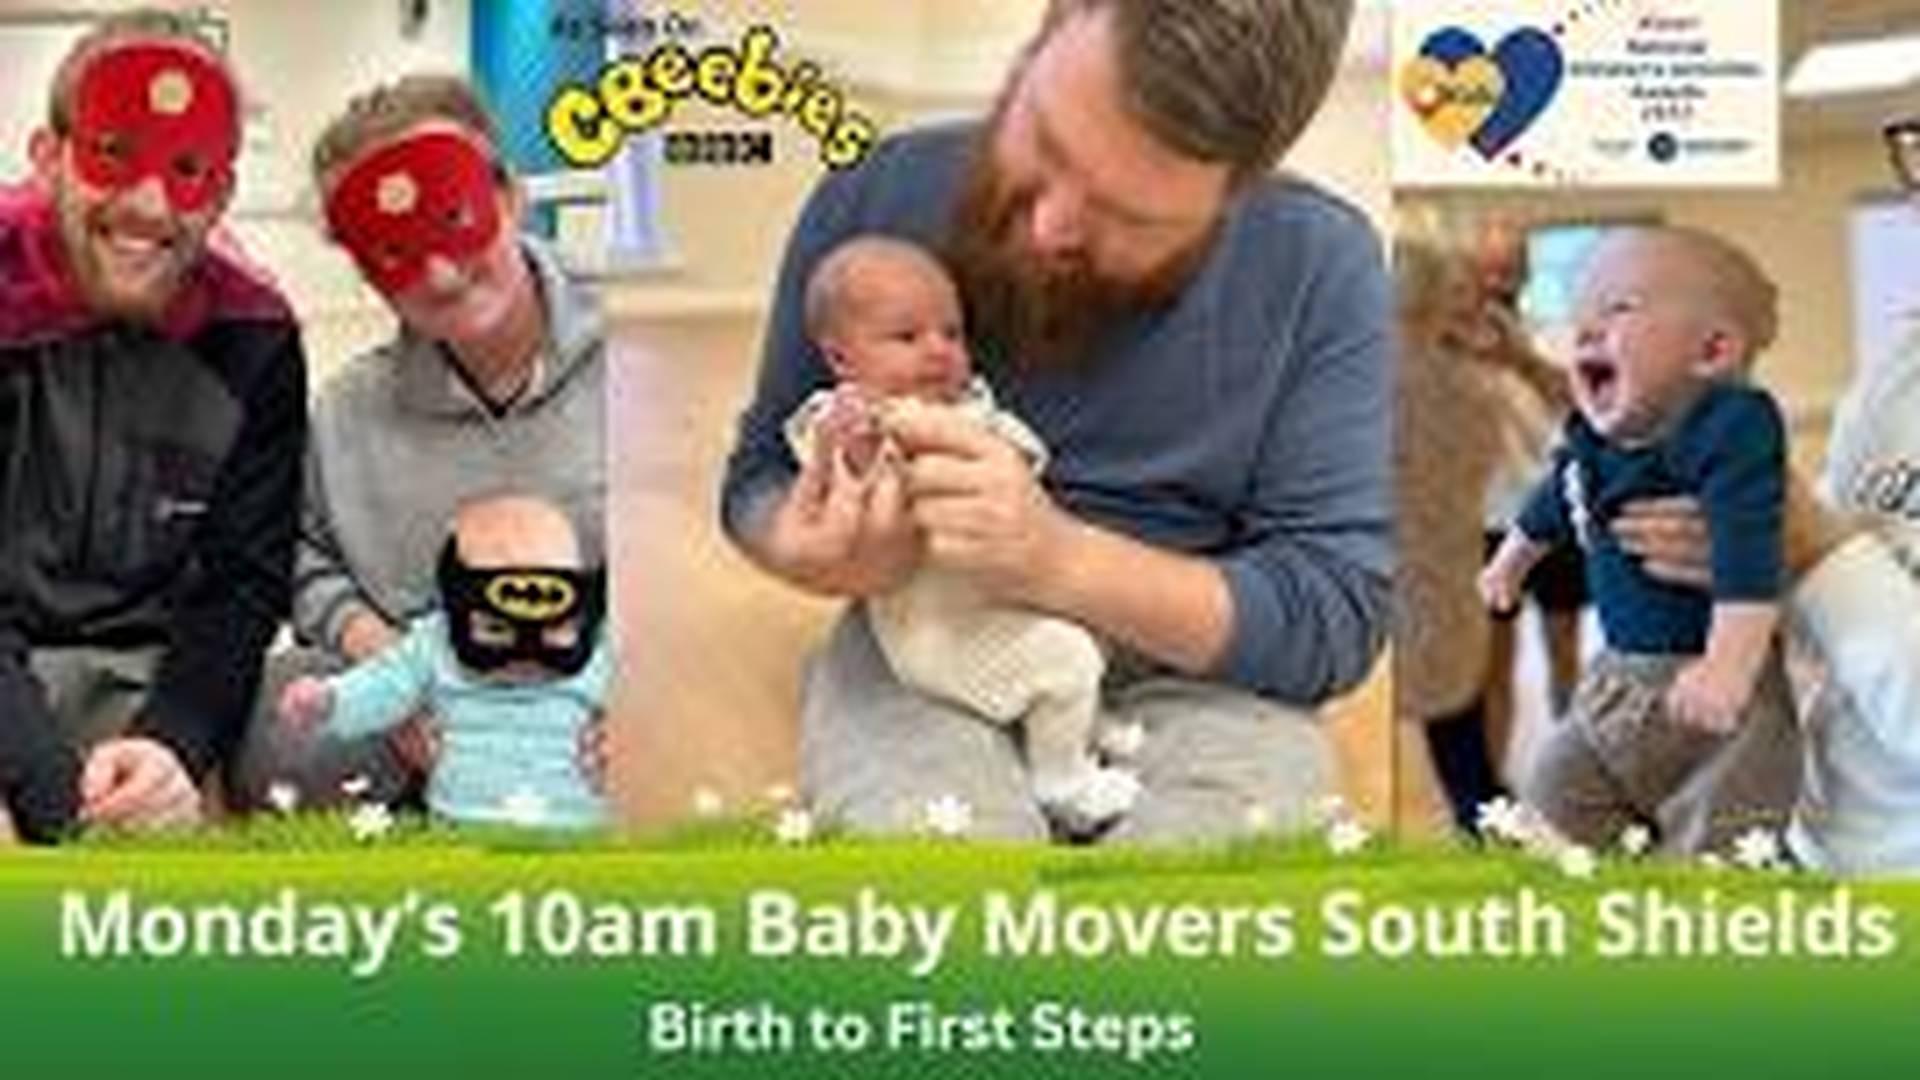 Mondays Baby Movers South Shields photo